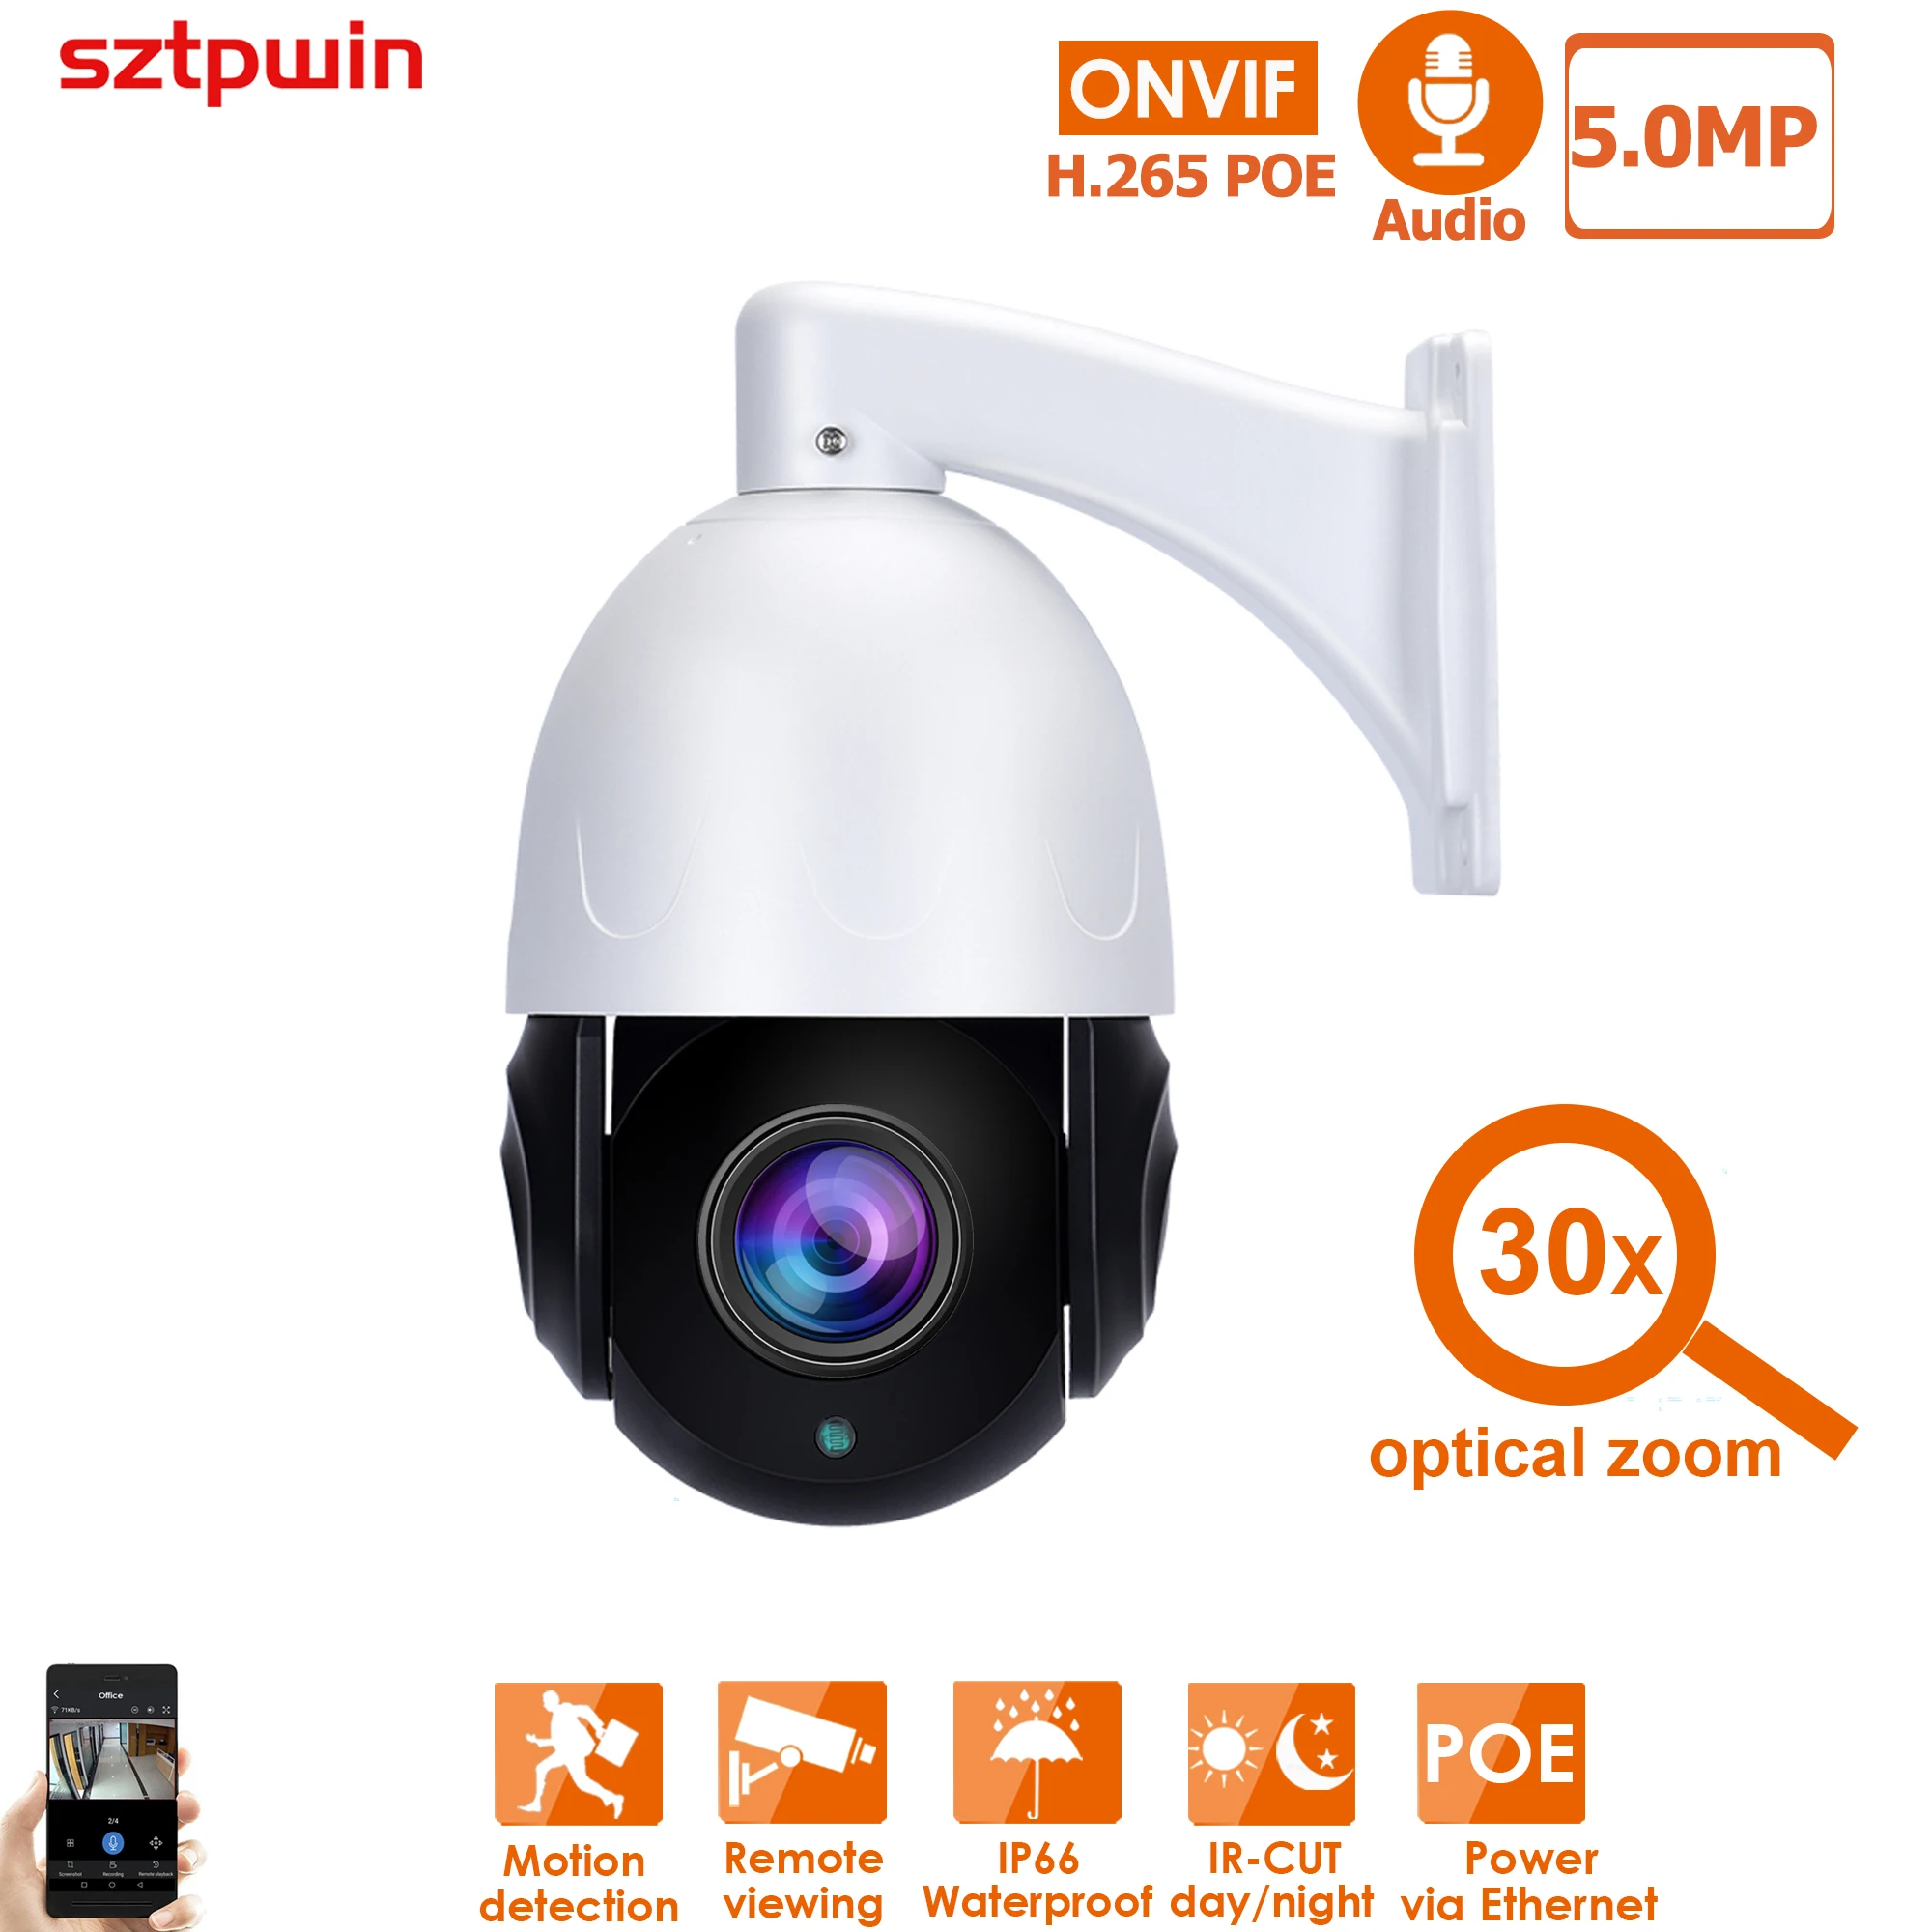 

5MP 30x Optical Zoom POE PTZ Video IP CCTV Surveillance Security NetworkCamera System Kit FaceDetection OutdoorWaterproof XMEYE